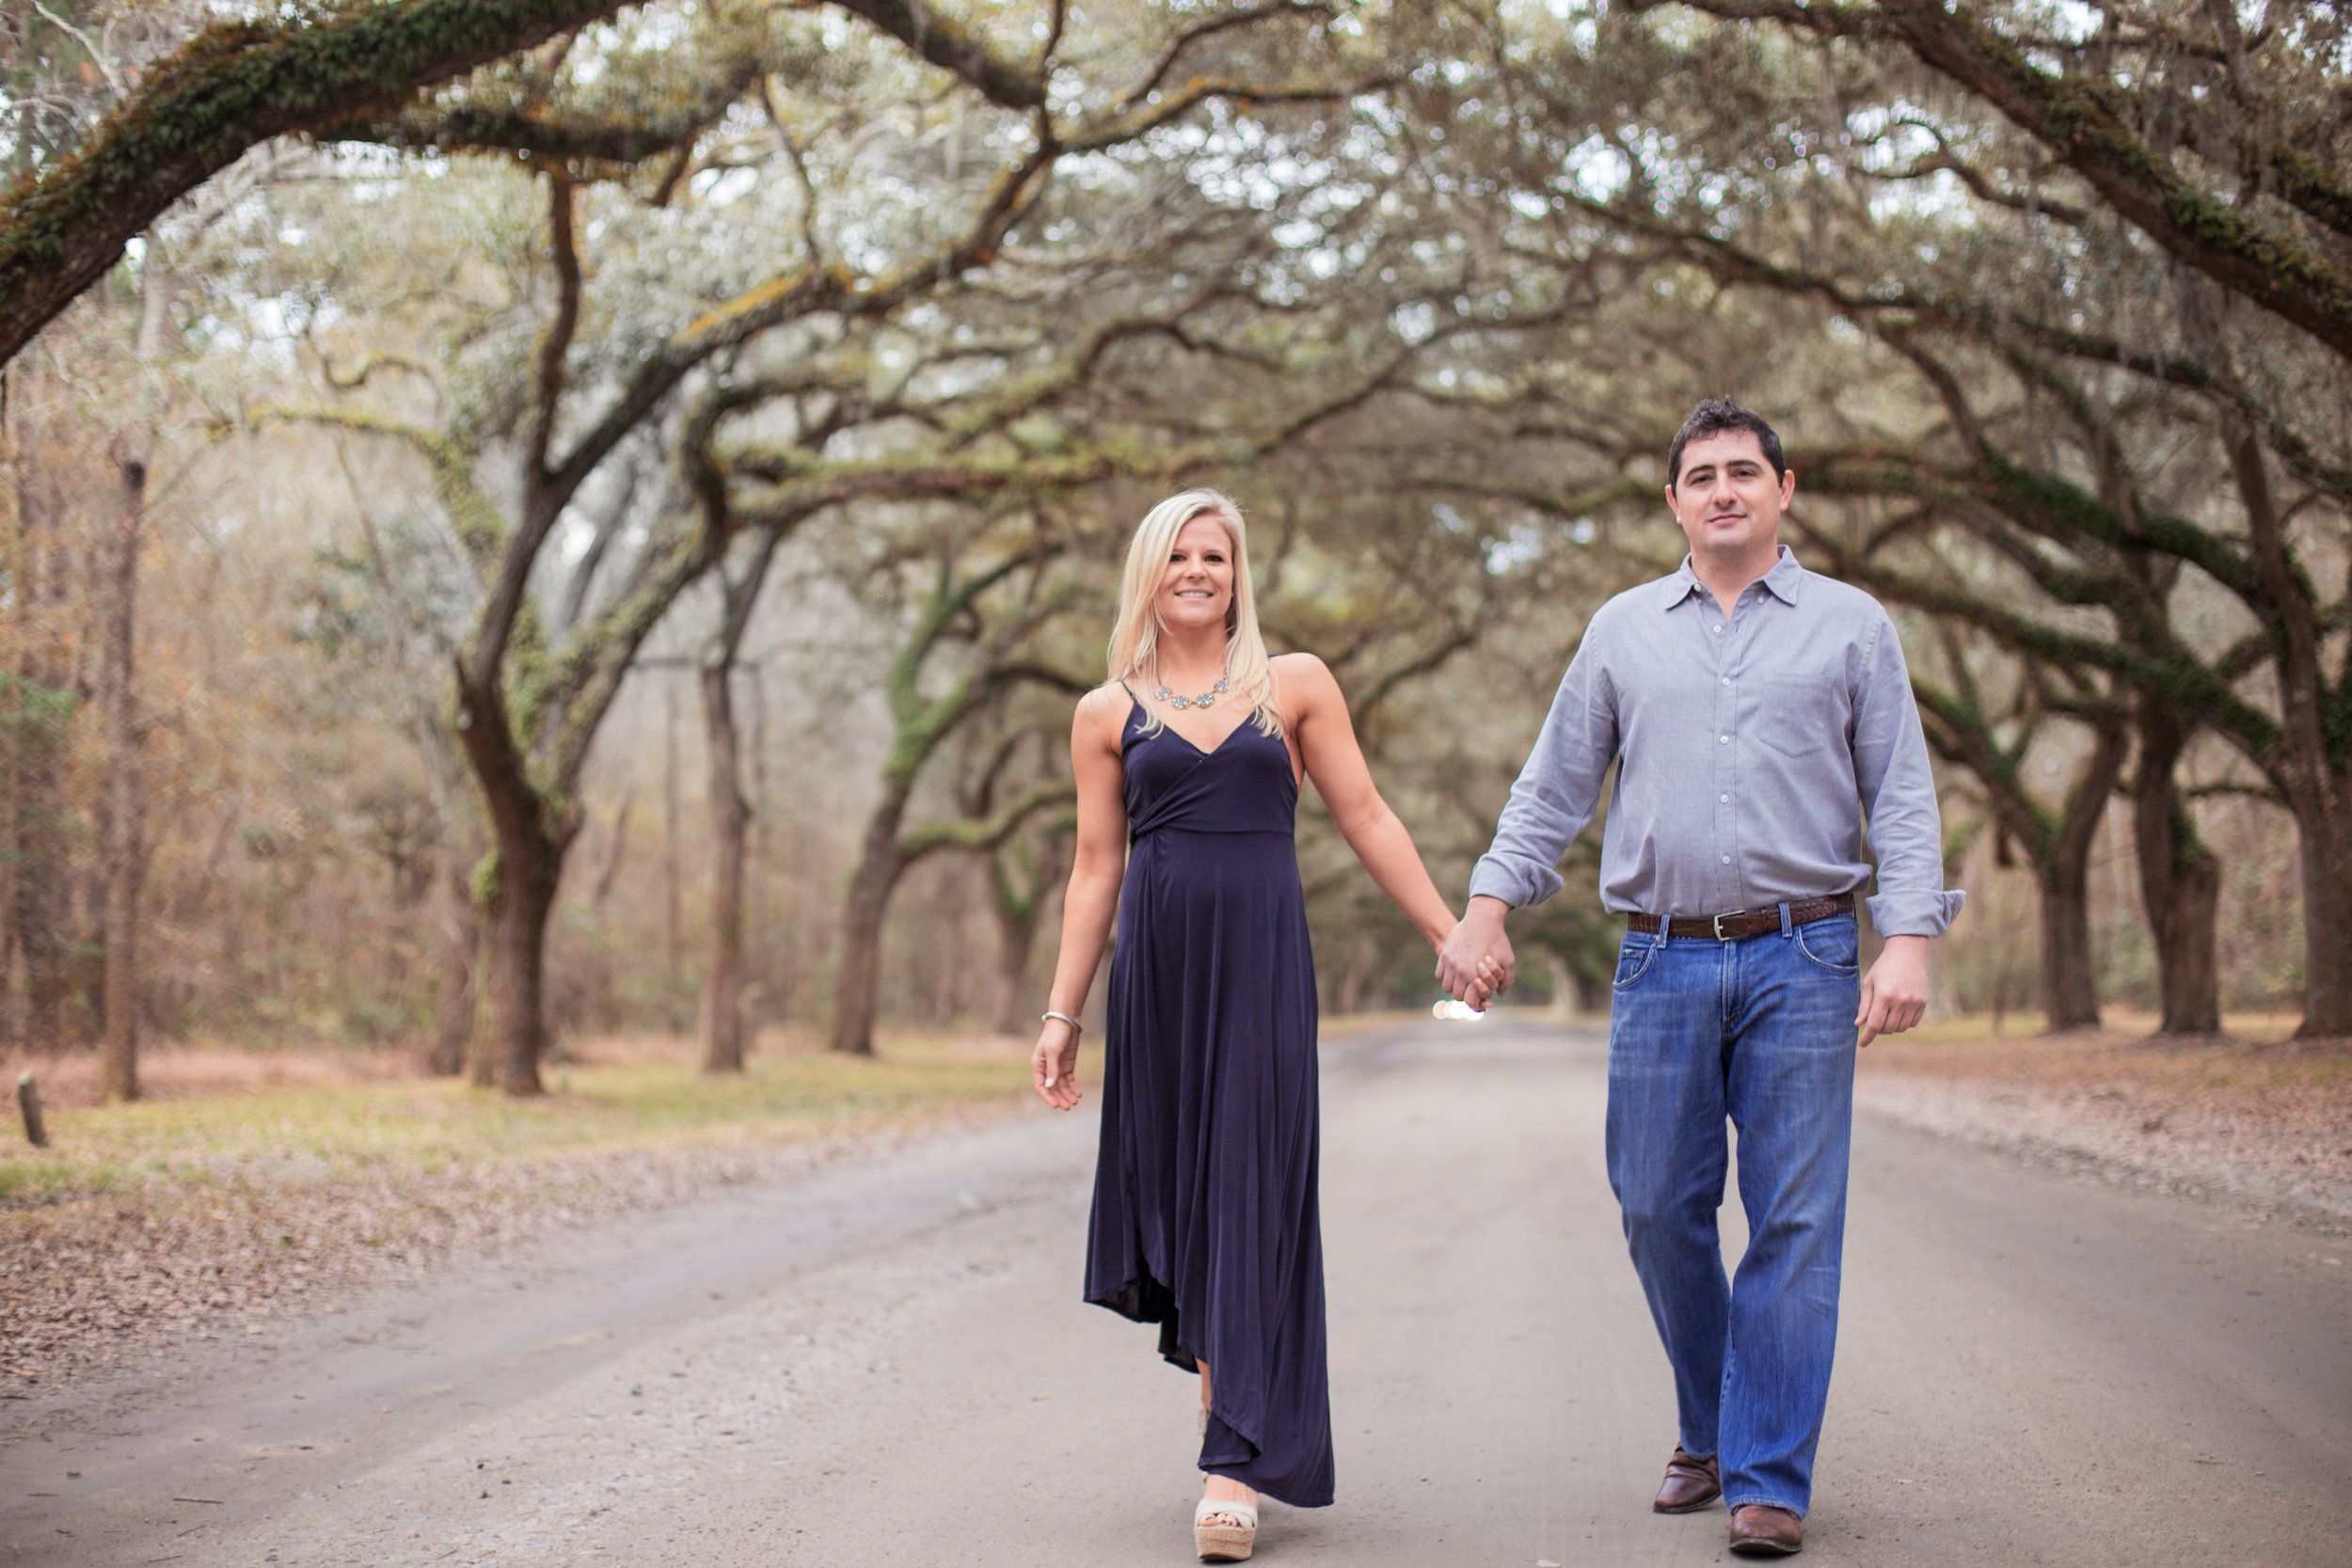 wormsloe-engagement-photos-man-and-woman-in-park _MG_9727.jpg